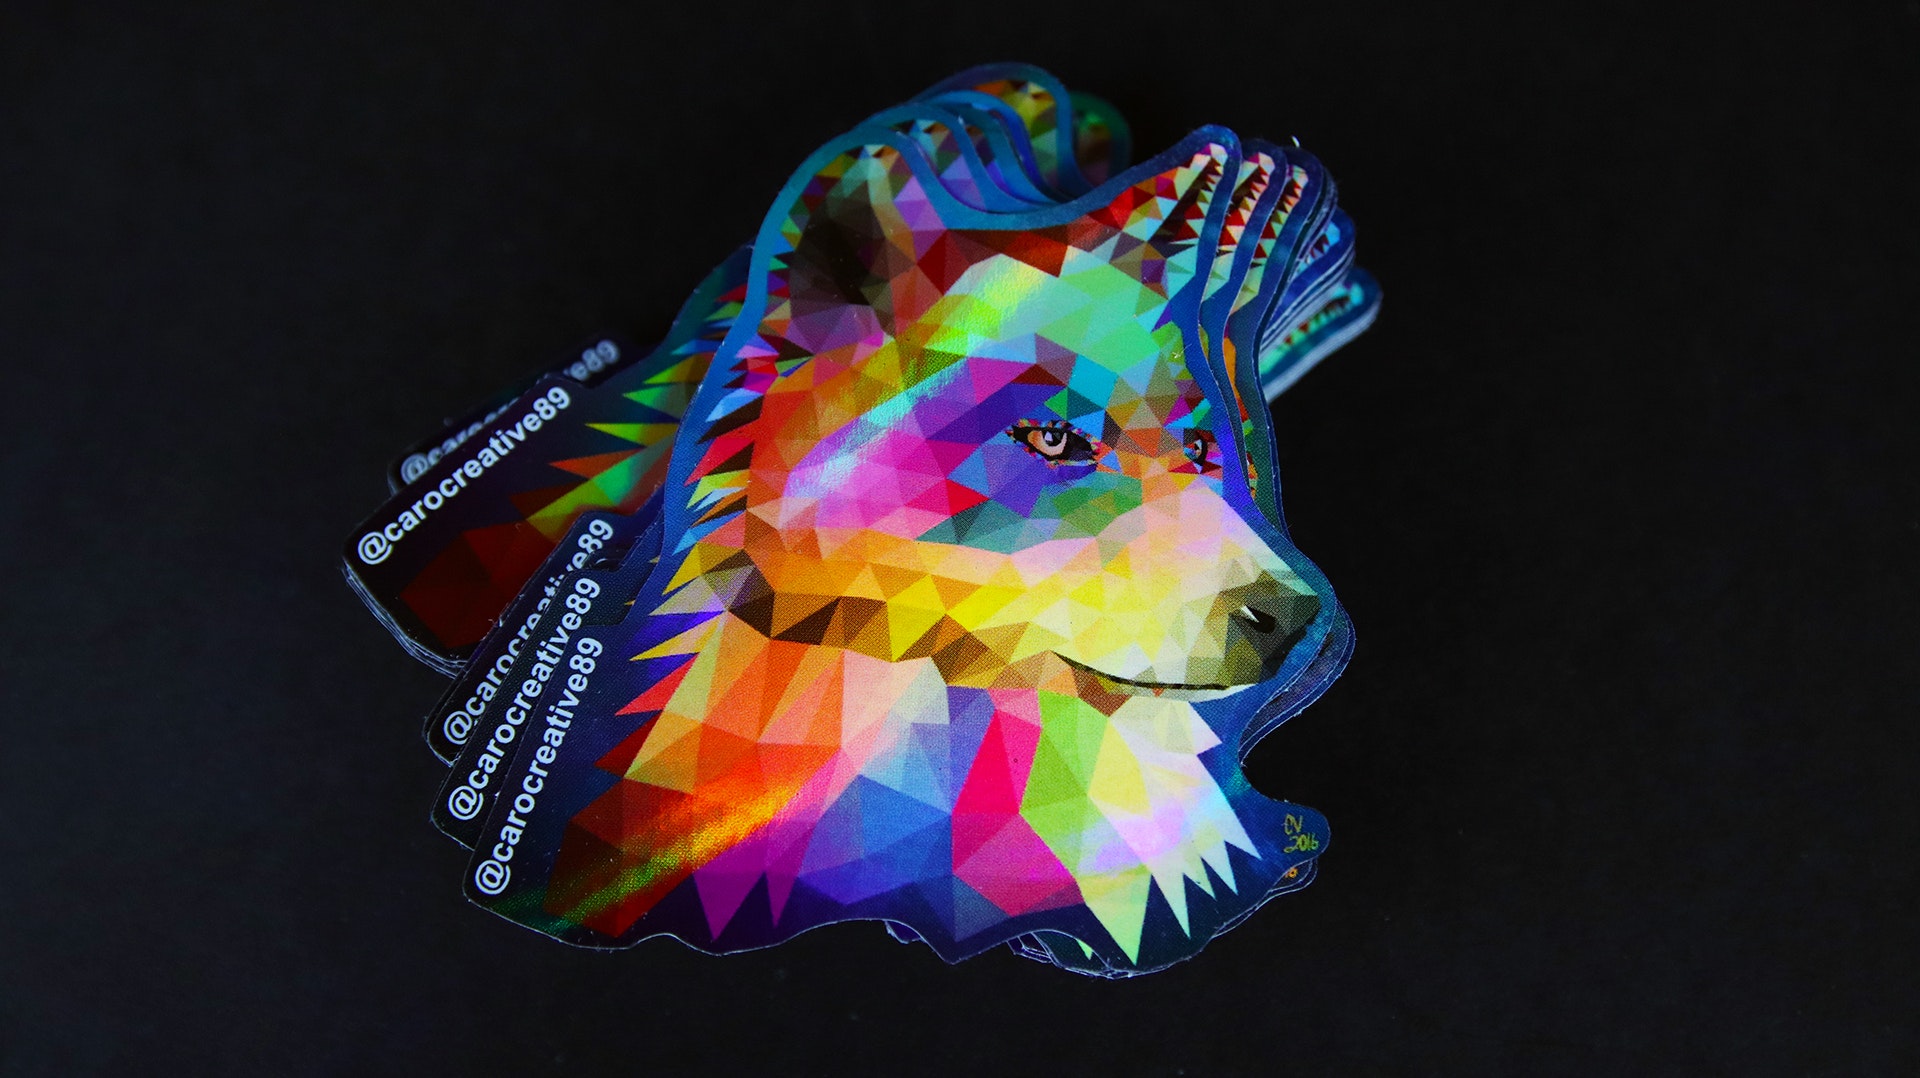 Die cut holographic sticker with geometric wold design against a black background